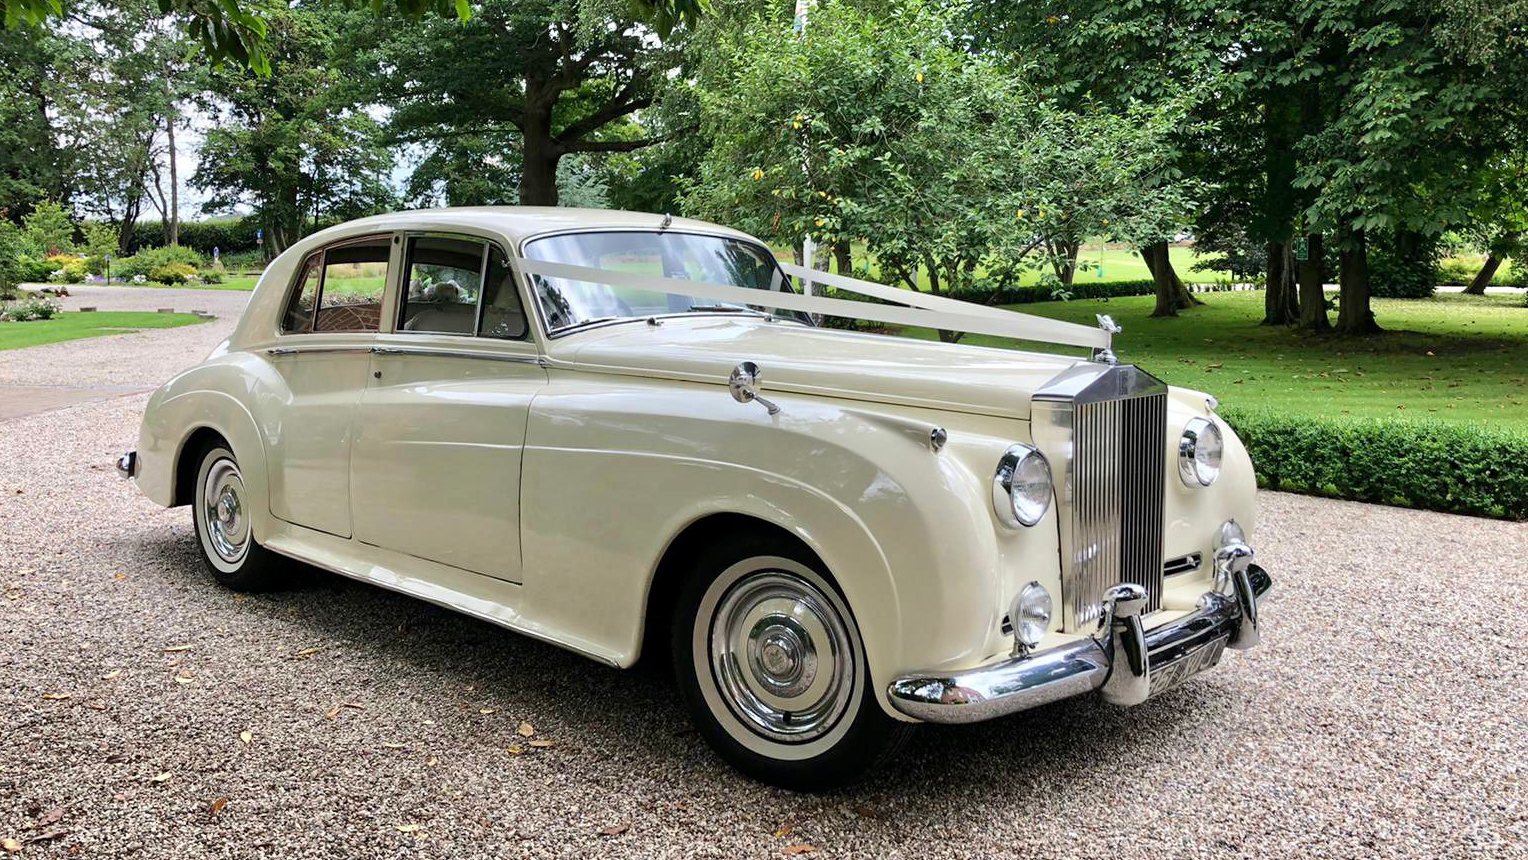 Classic Rolls-Royce Silver Cloud decorated with Ivory Ribbons at a local Hatfield park with green trees in the background